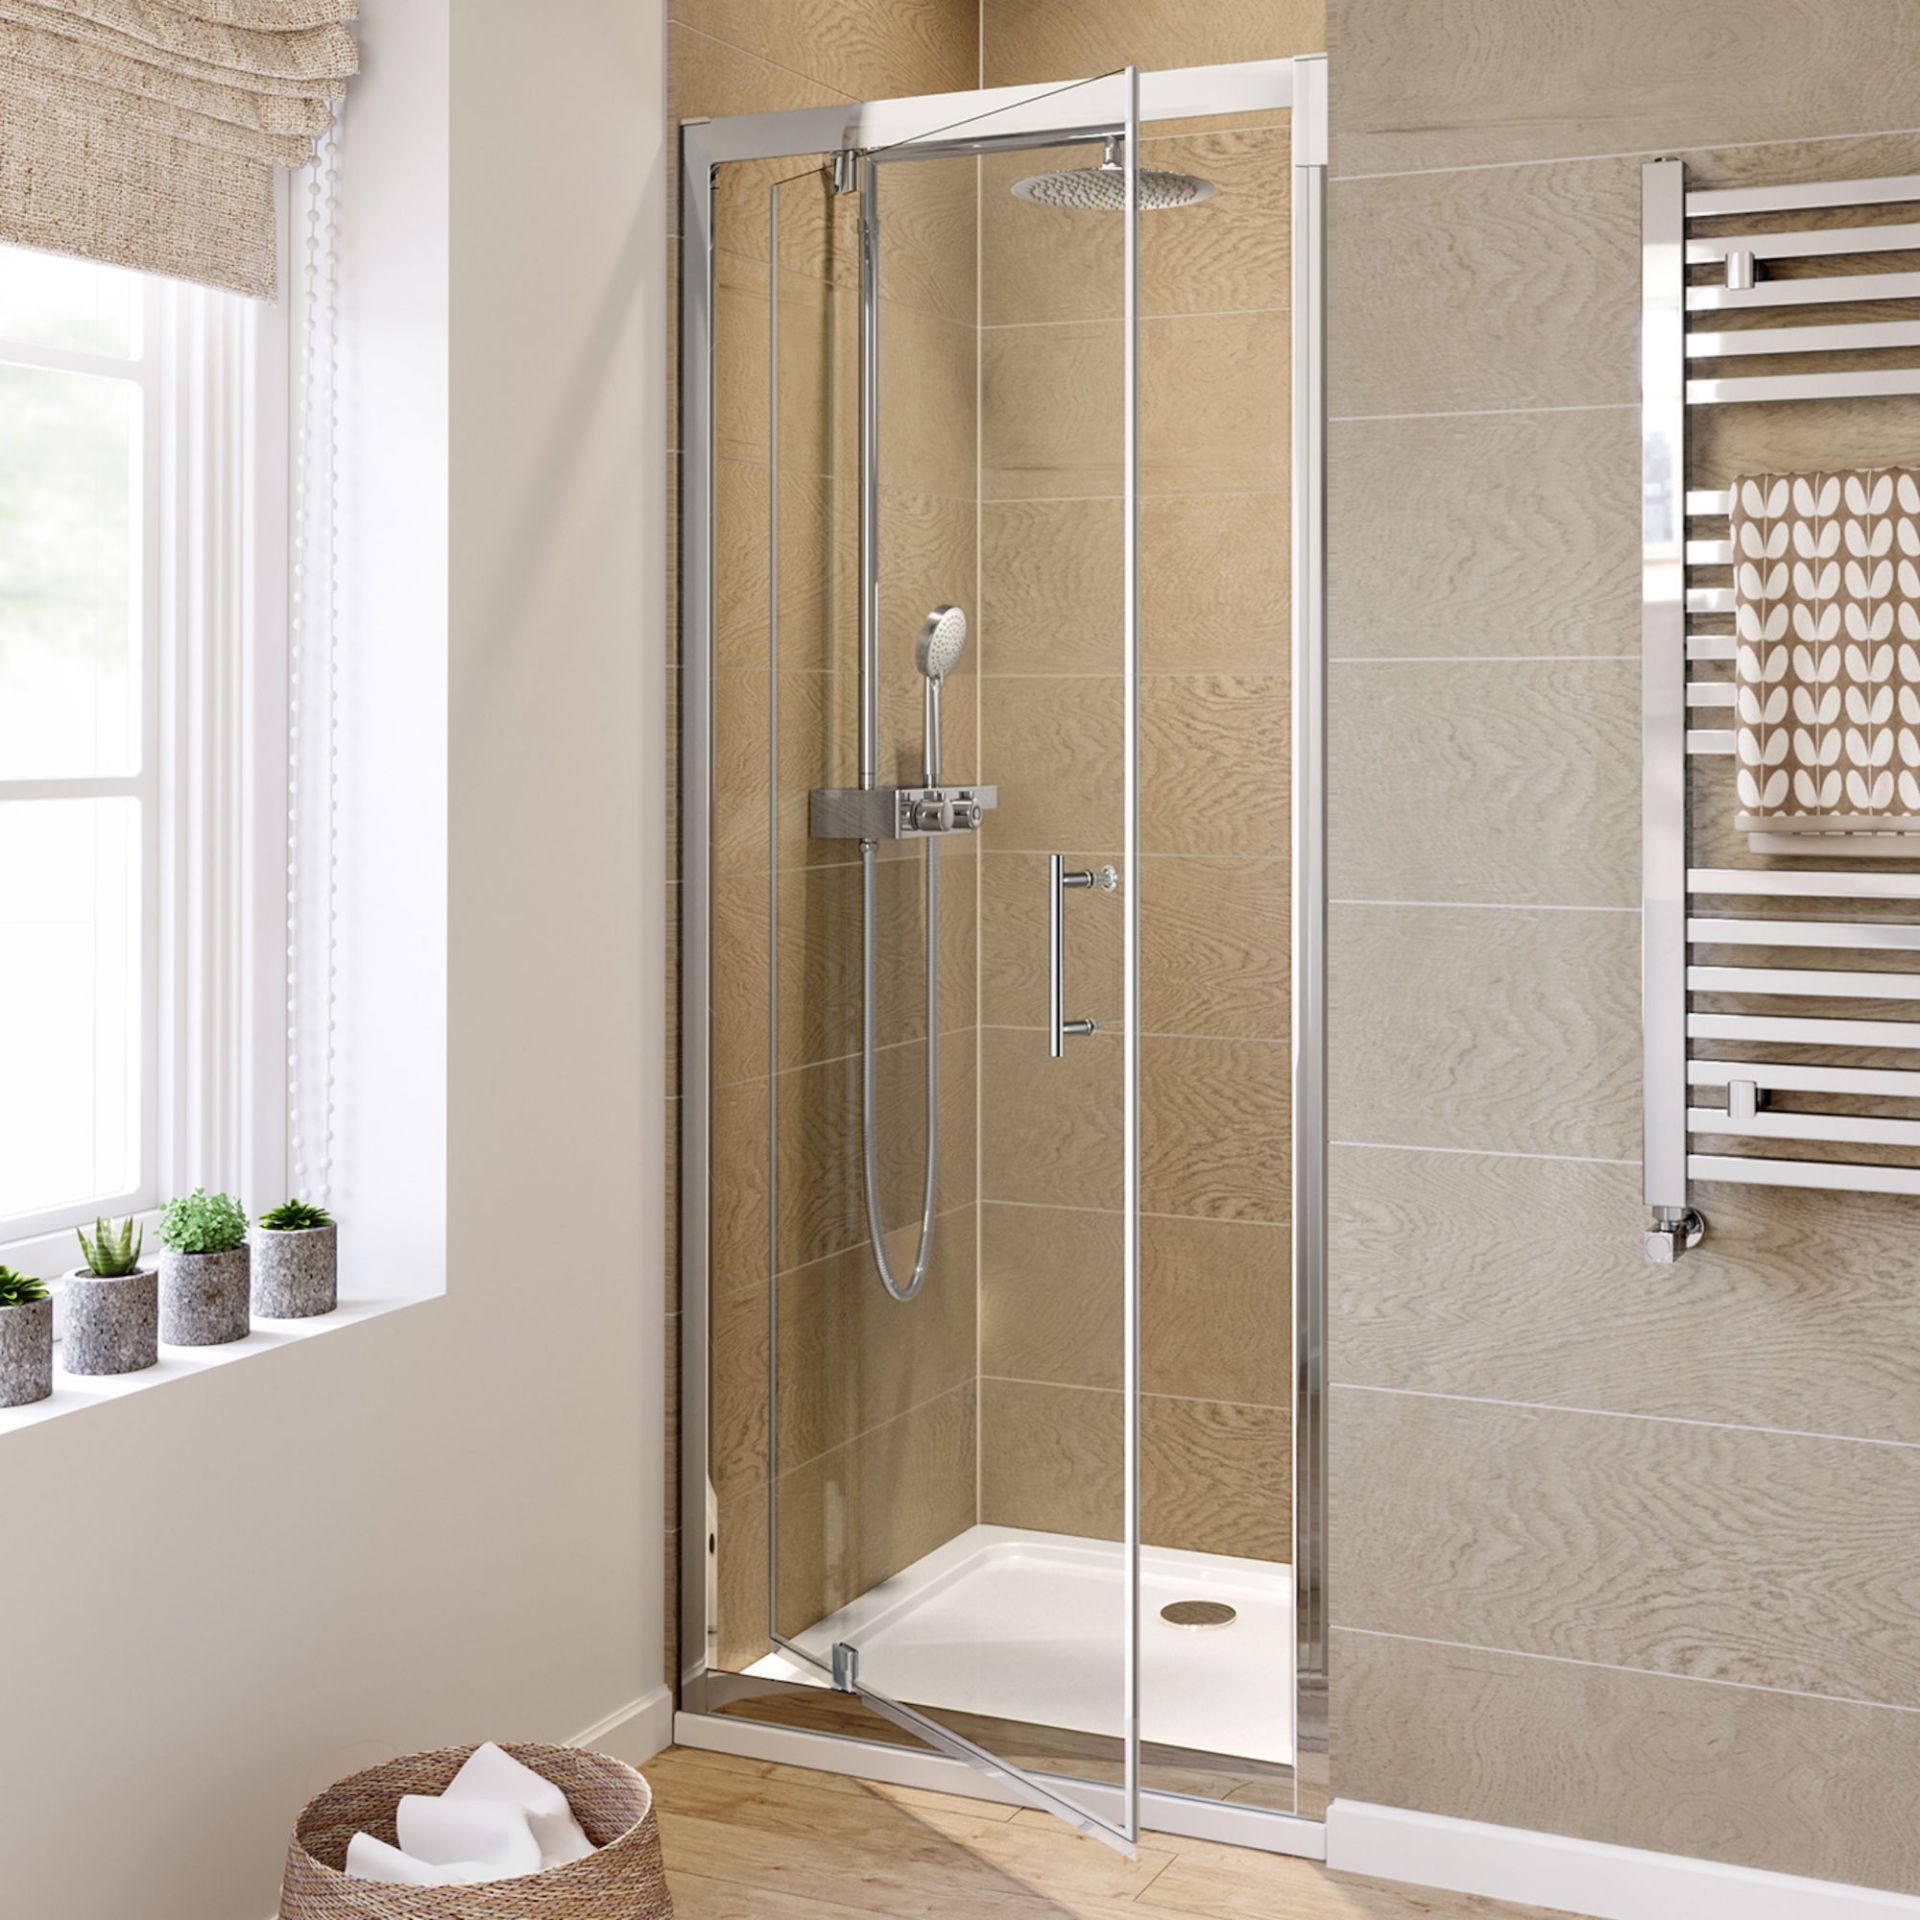 New (P126) 760mm 6mm - Elements Pivot 760mm Shower Door 6mm. Safety Glass Fully Waterproof Tes...